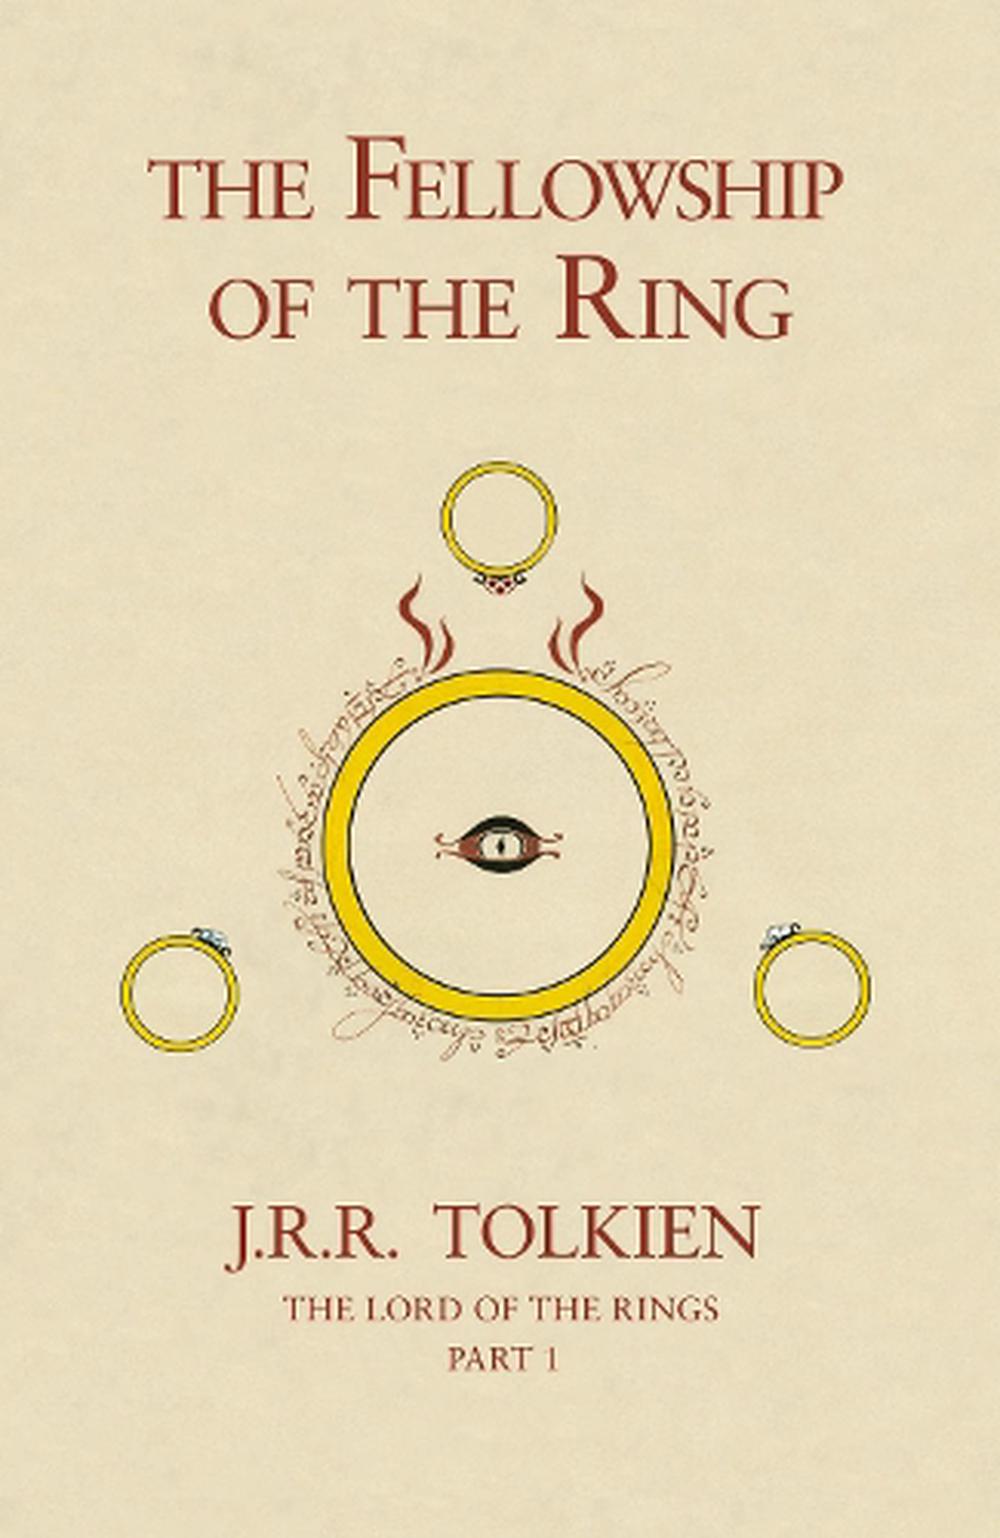 the-fellowship-of-the-ring-by-j-r-r-tolkien-hardcover-book-free-shipping-9780007203543-ebay